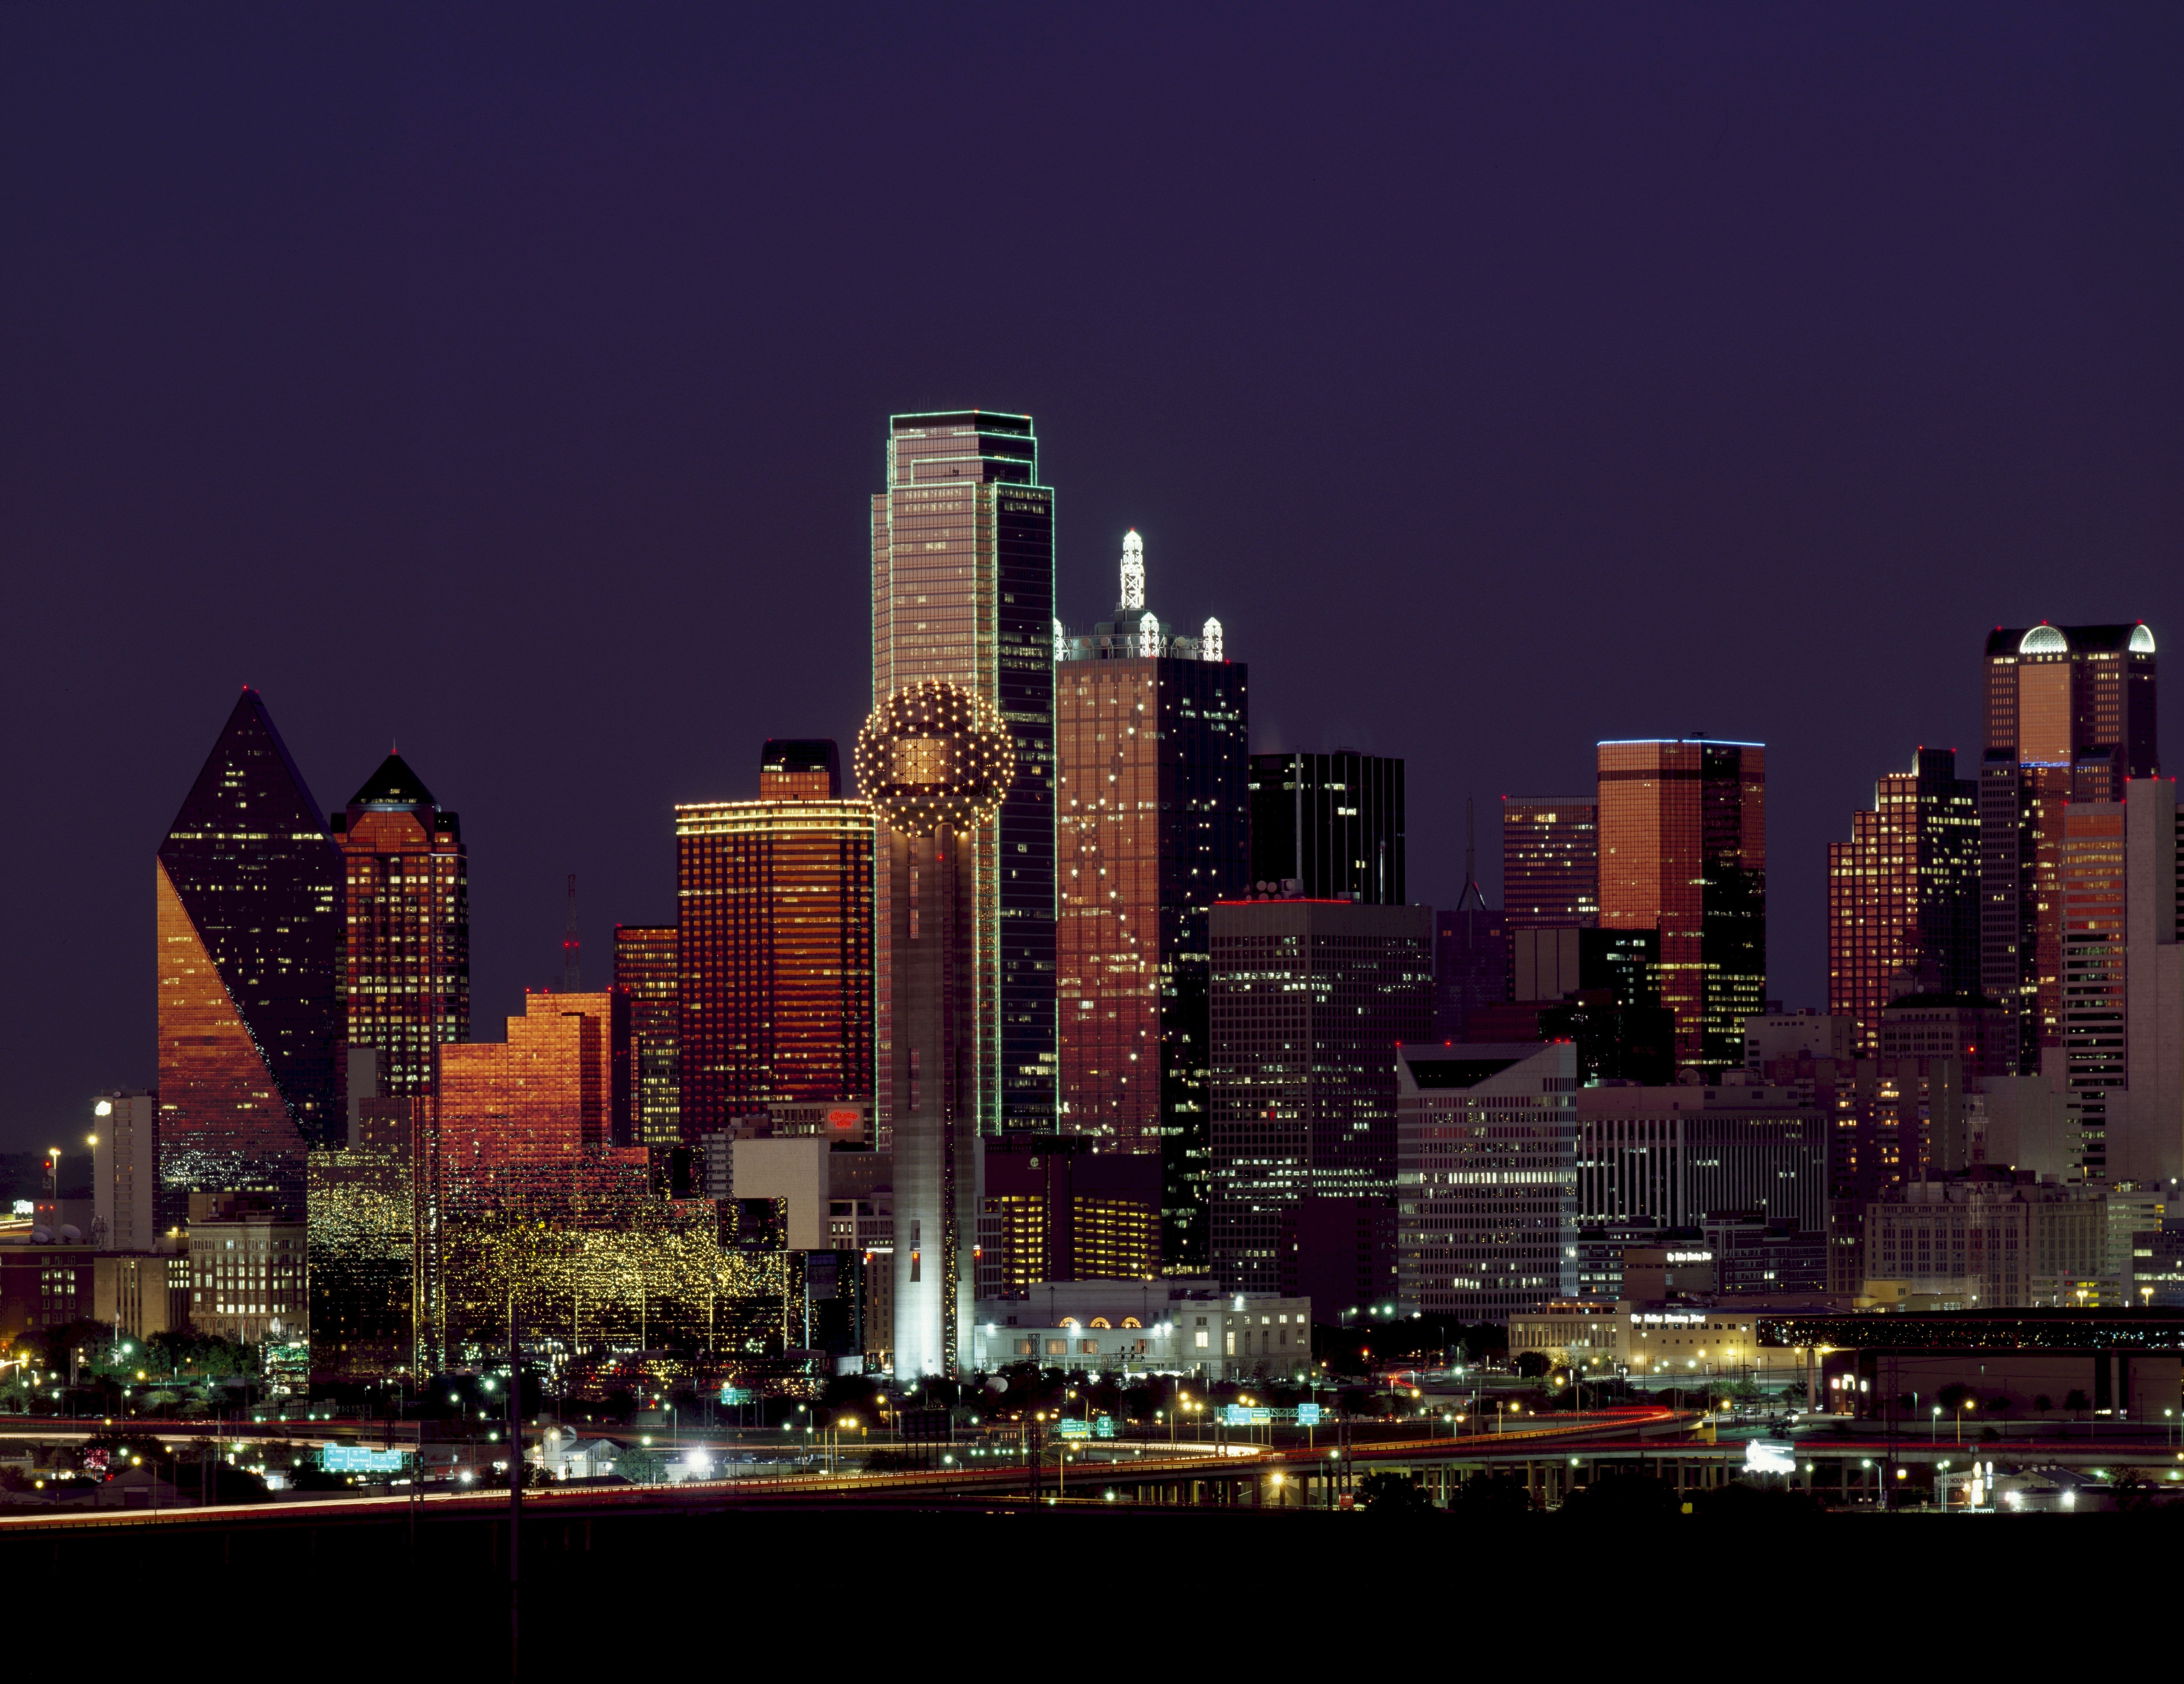 A city skyline at night with traffic on the road - Texas